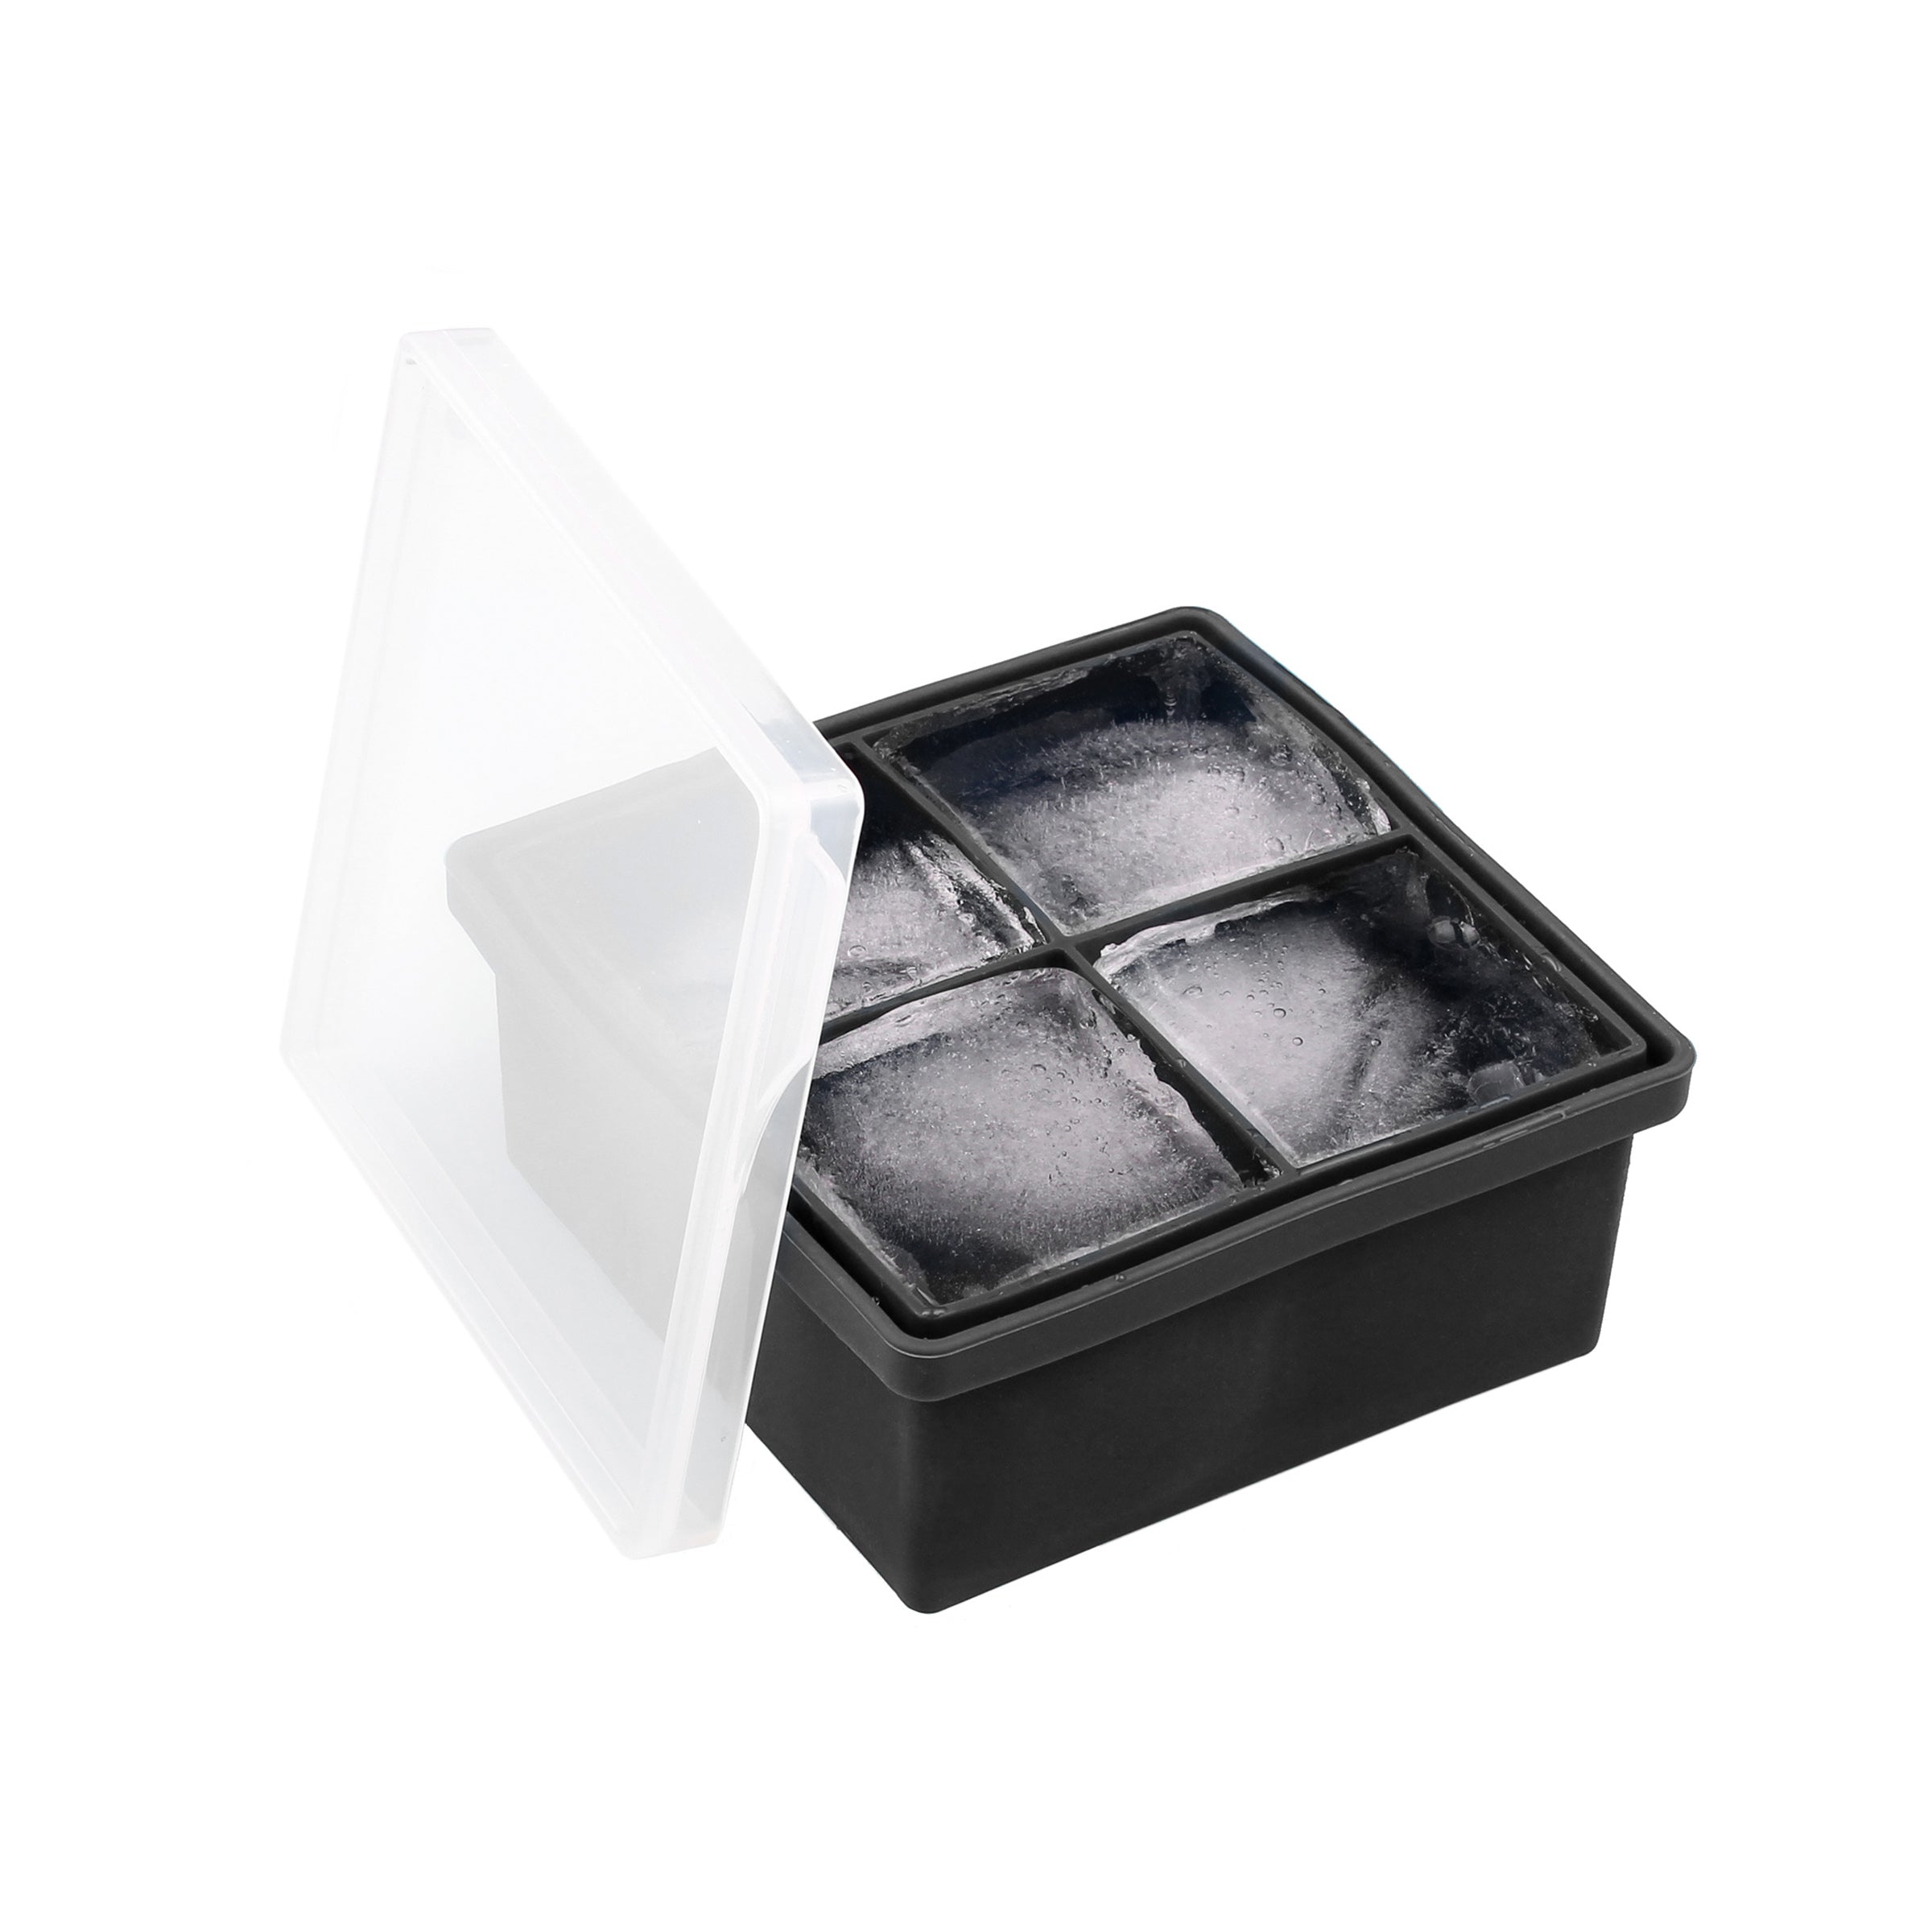 Up To 80% Off on Large Silicone Ice Mold Maker